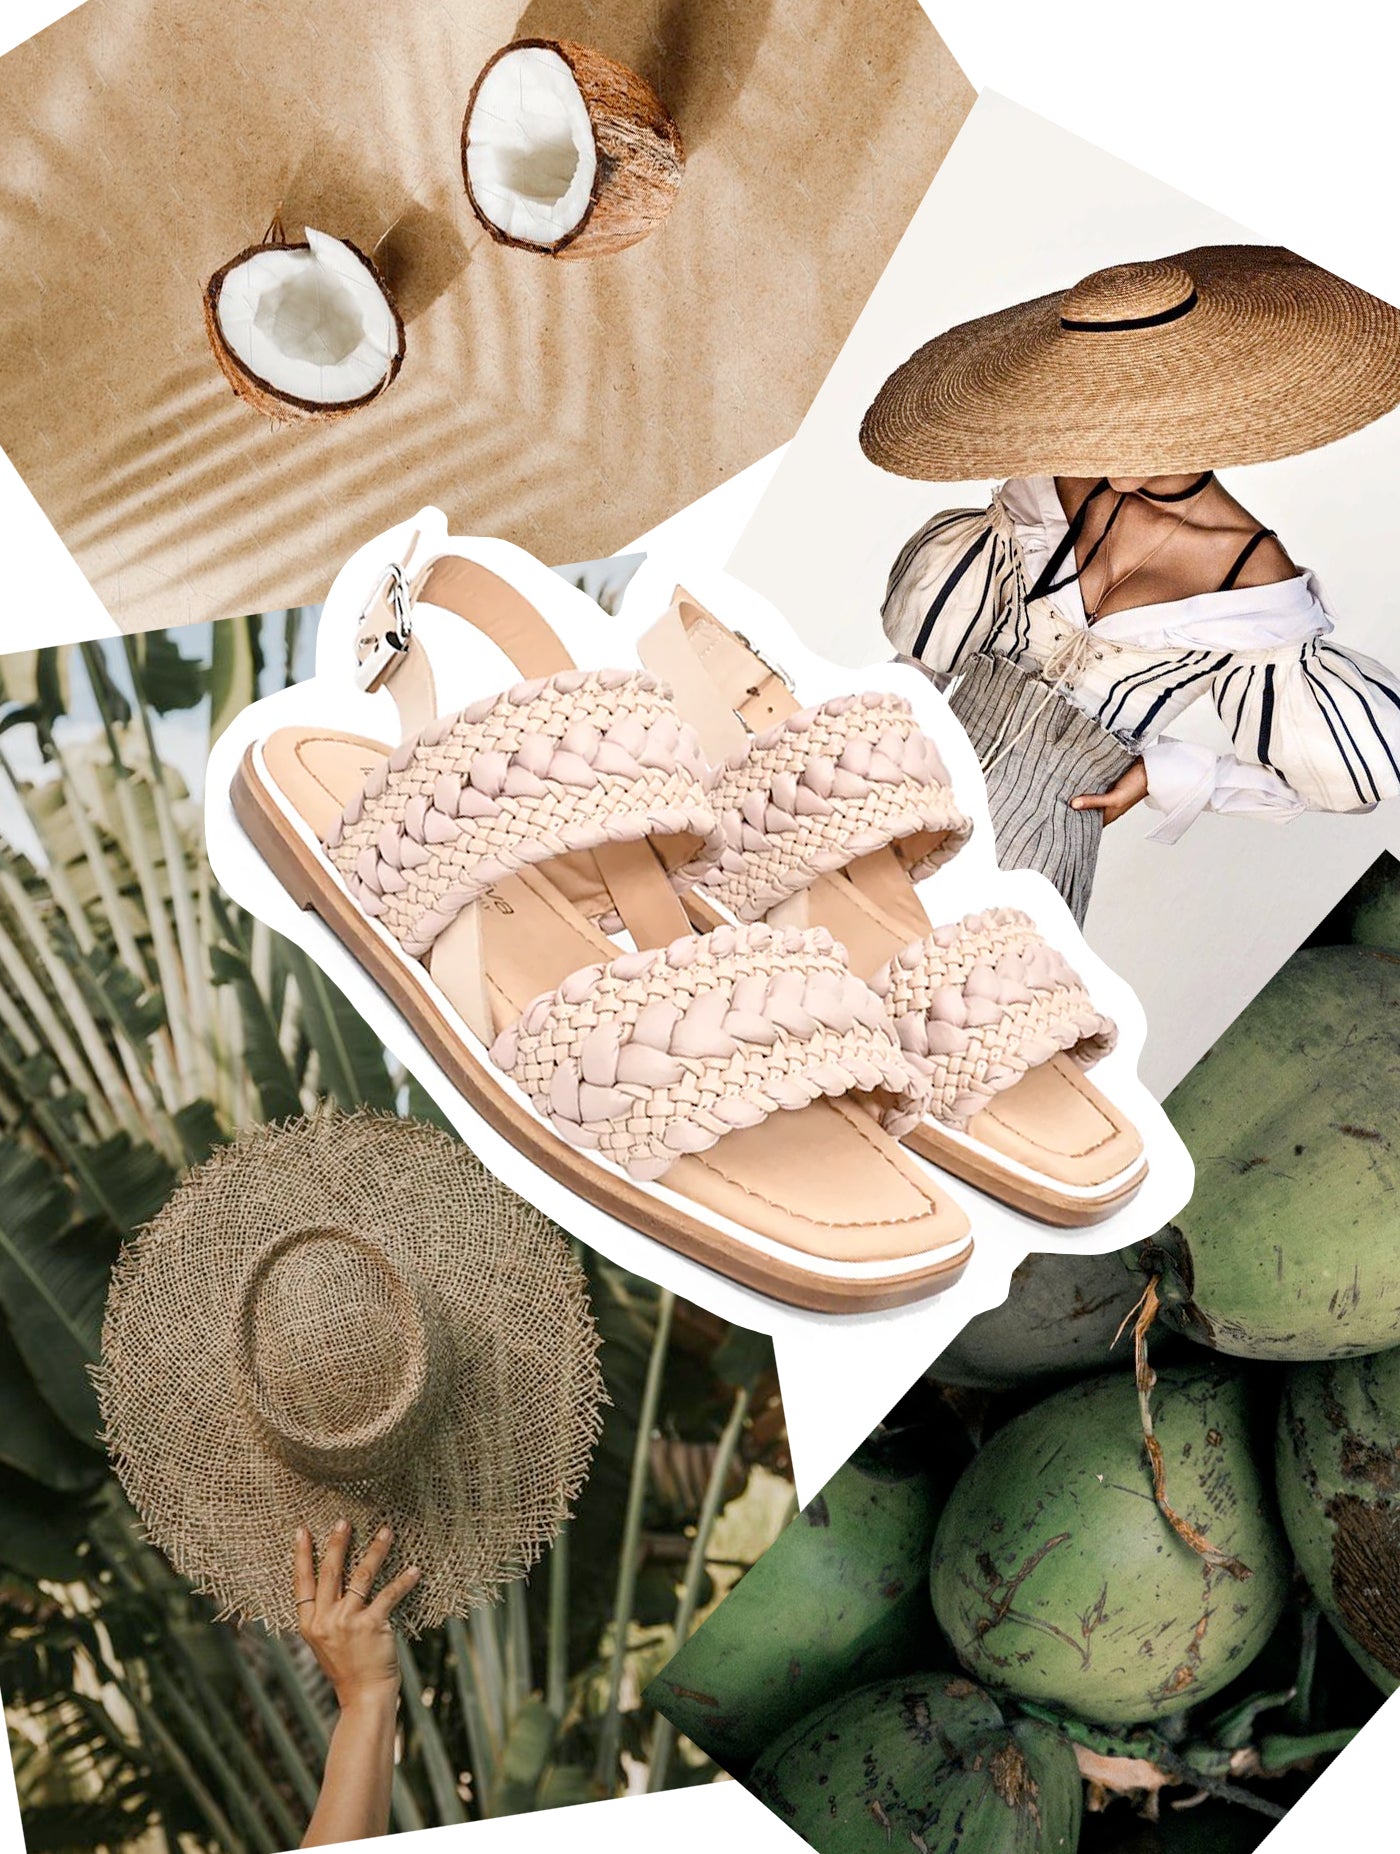 The hottest summer sandals at Dolita from Italy